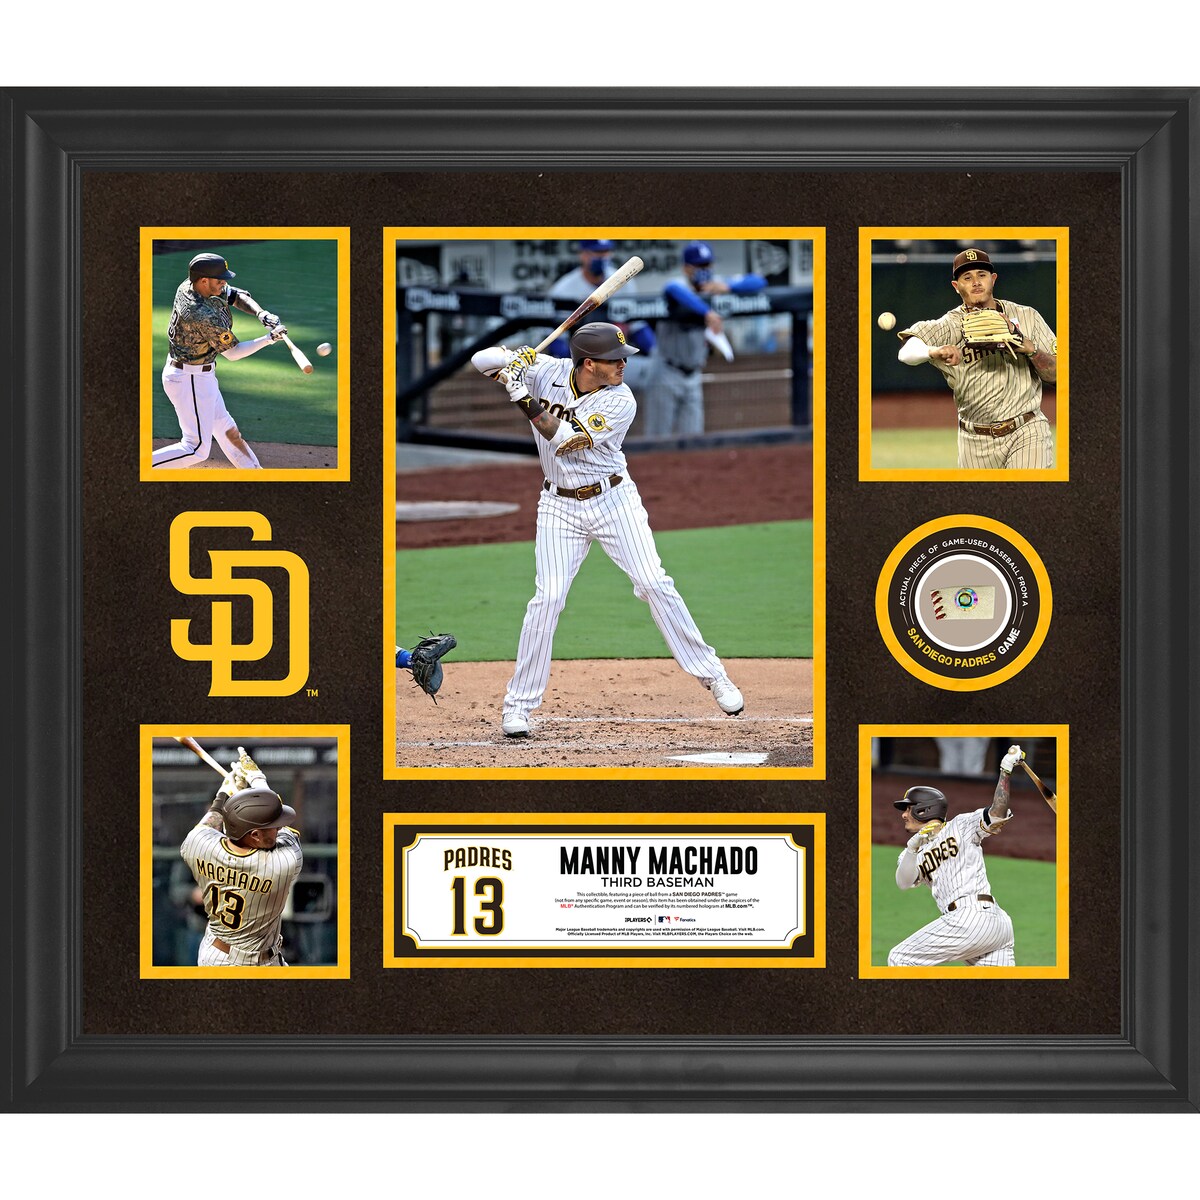 Take your collection of San Diego Padres memorabilia to the next level with this Manny Machado Framed 5-Photo Collage wi...